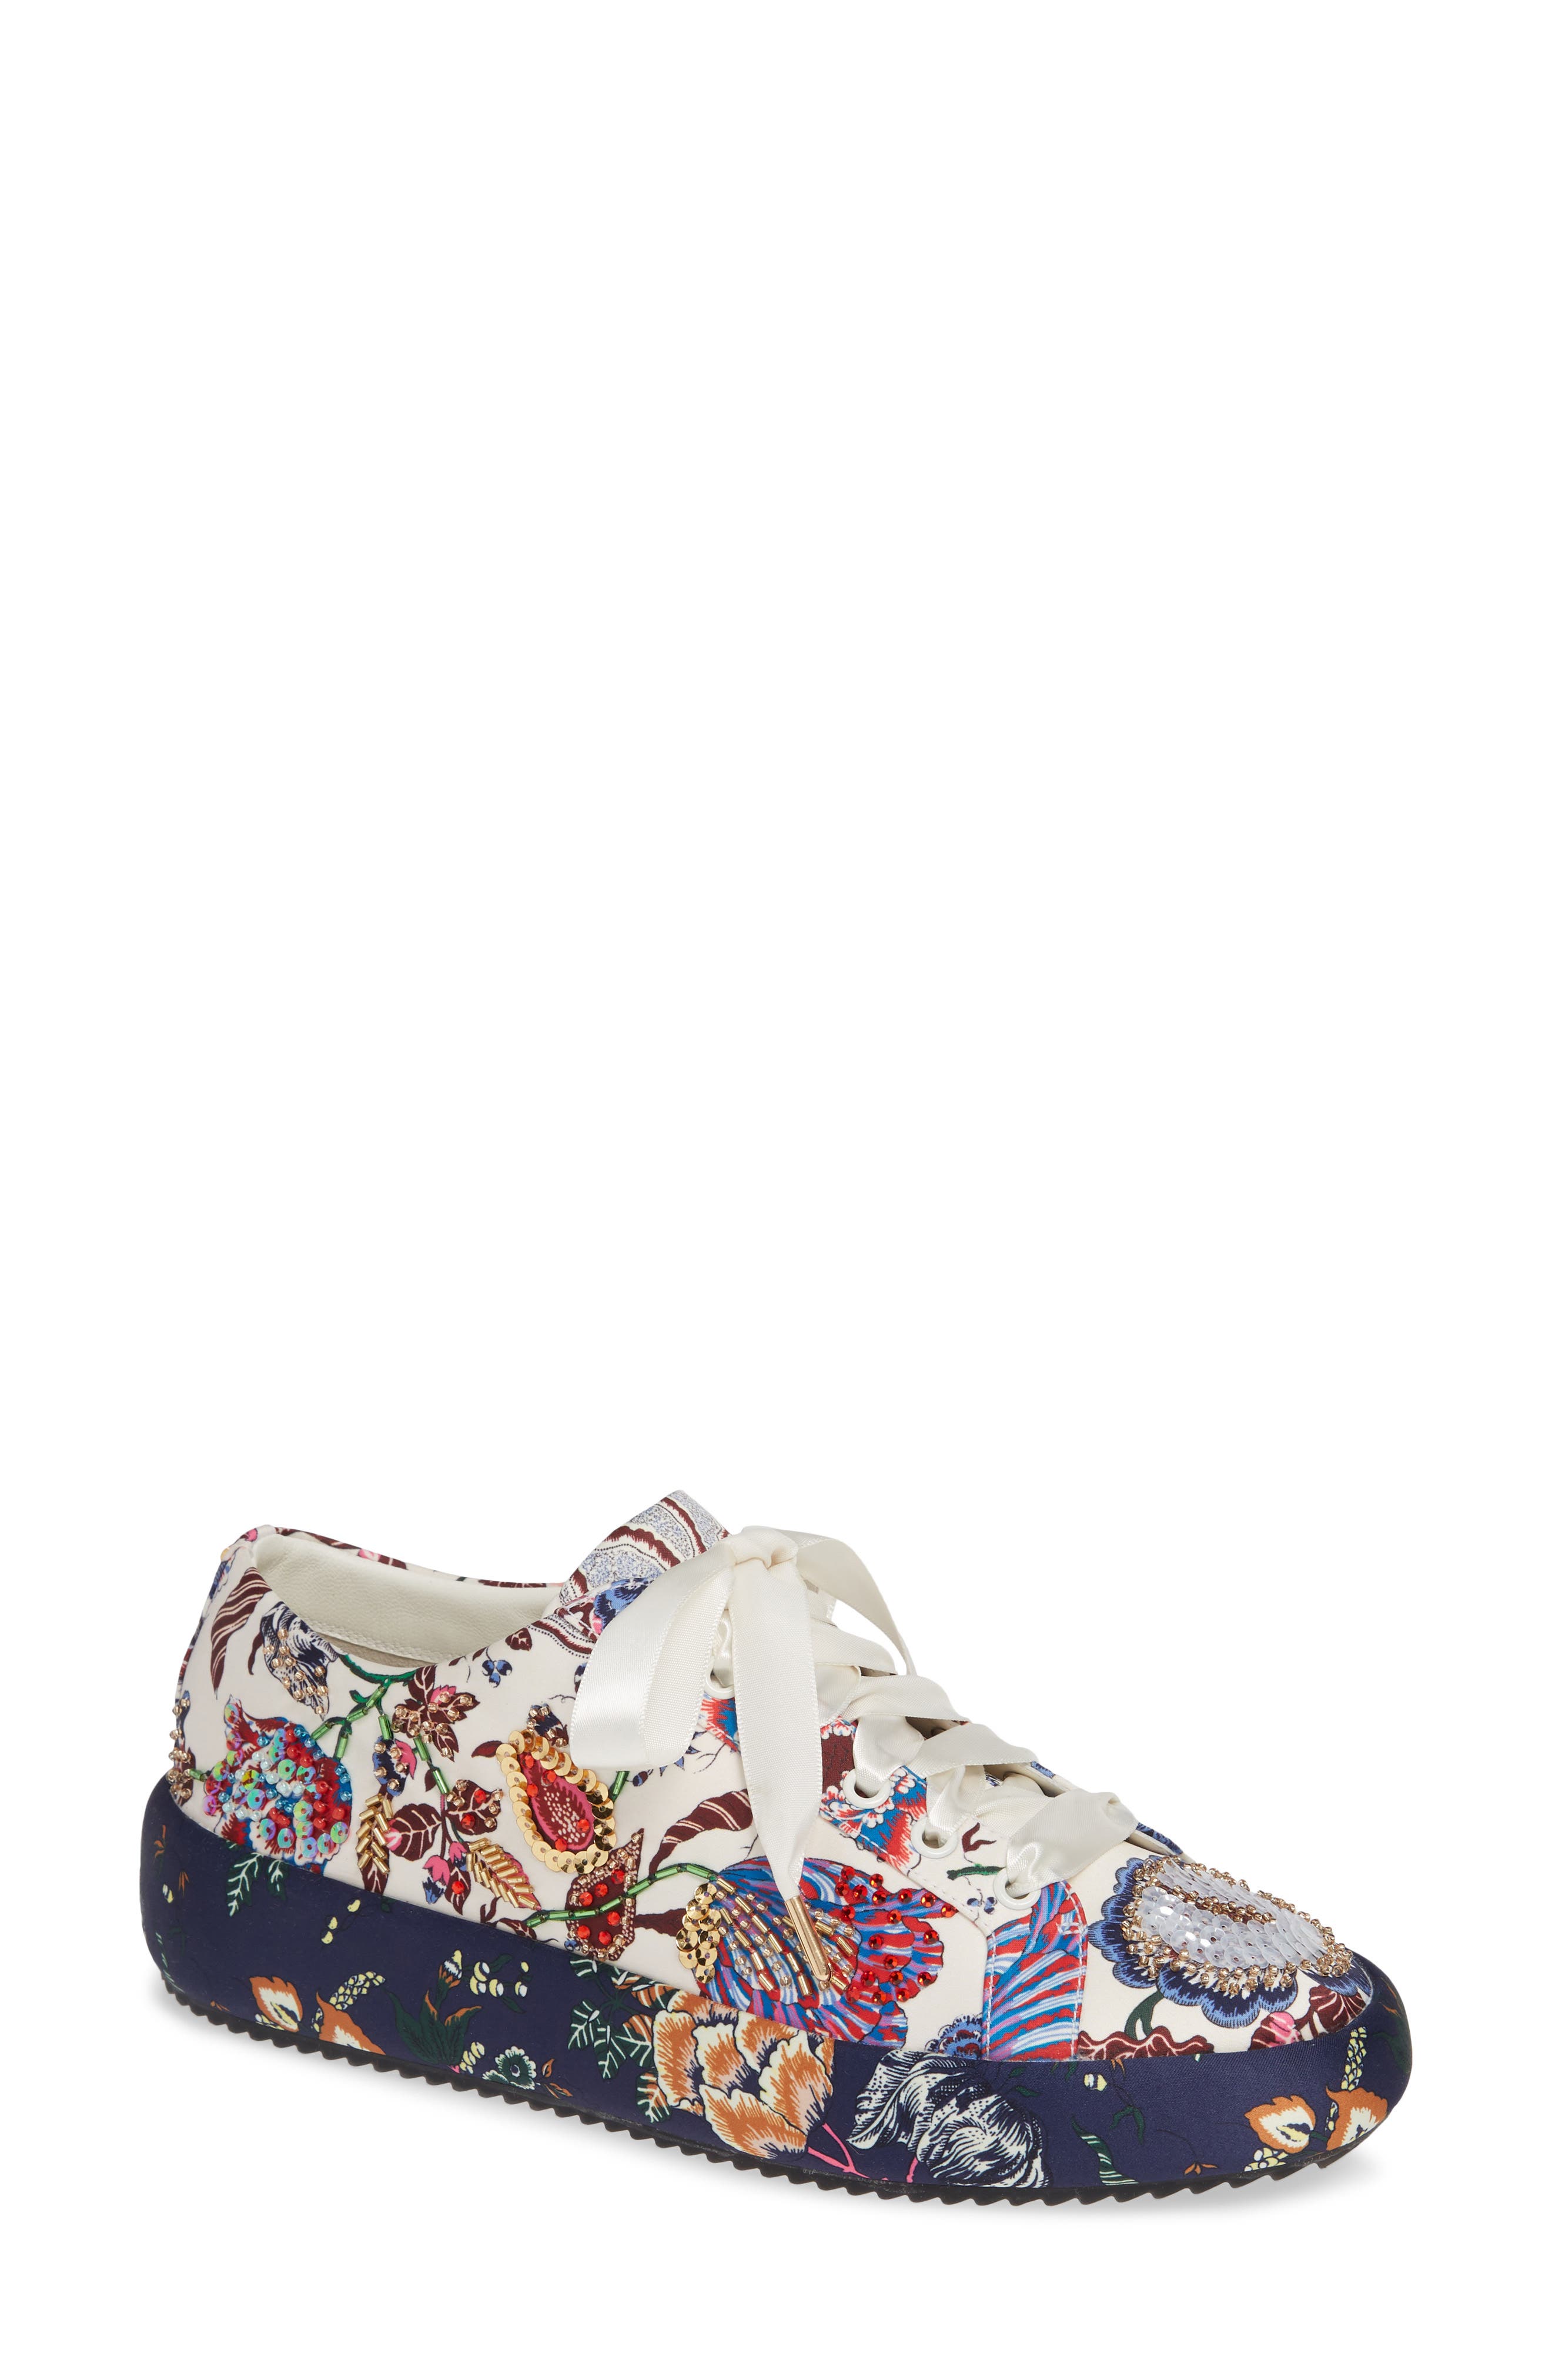 tory burch floral sneakers